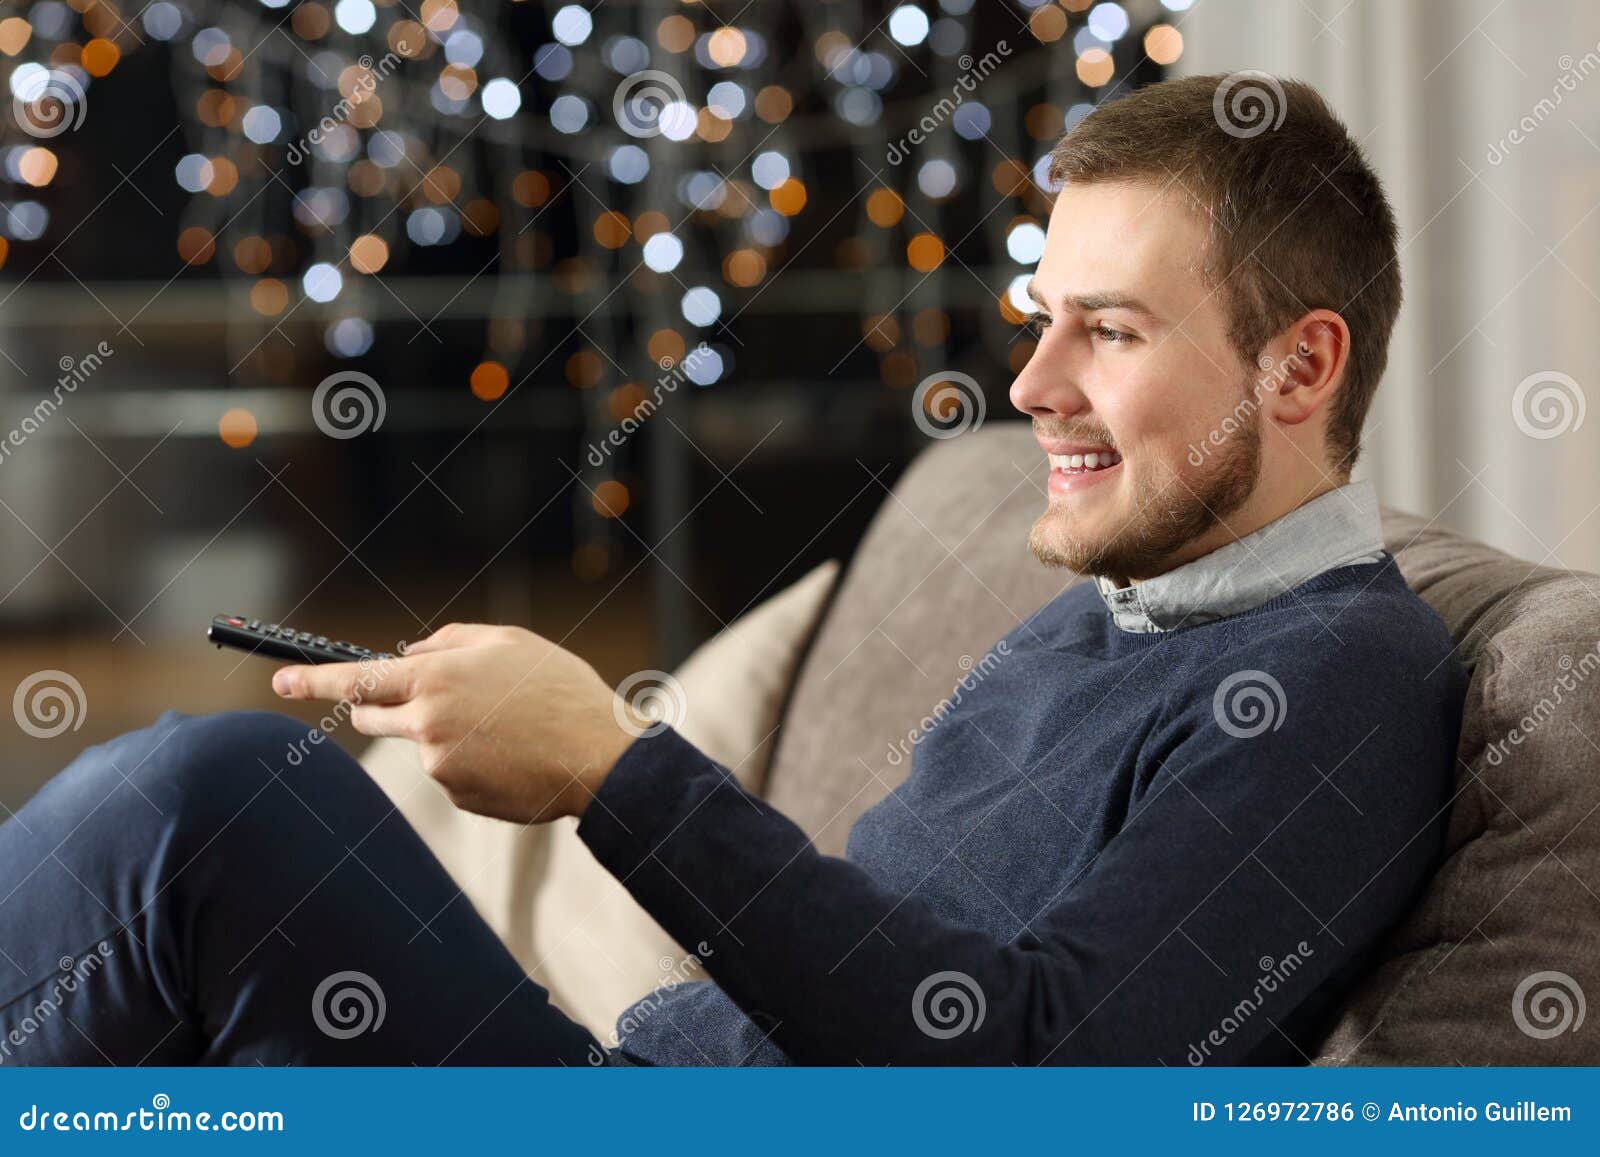  Man  Watching  Tv  At Home In The Night  Stock Photo Image 